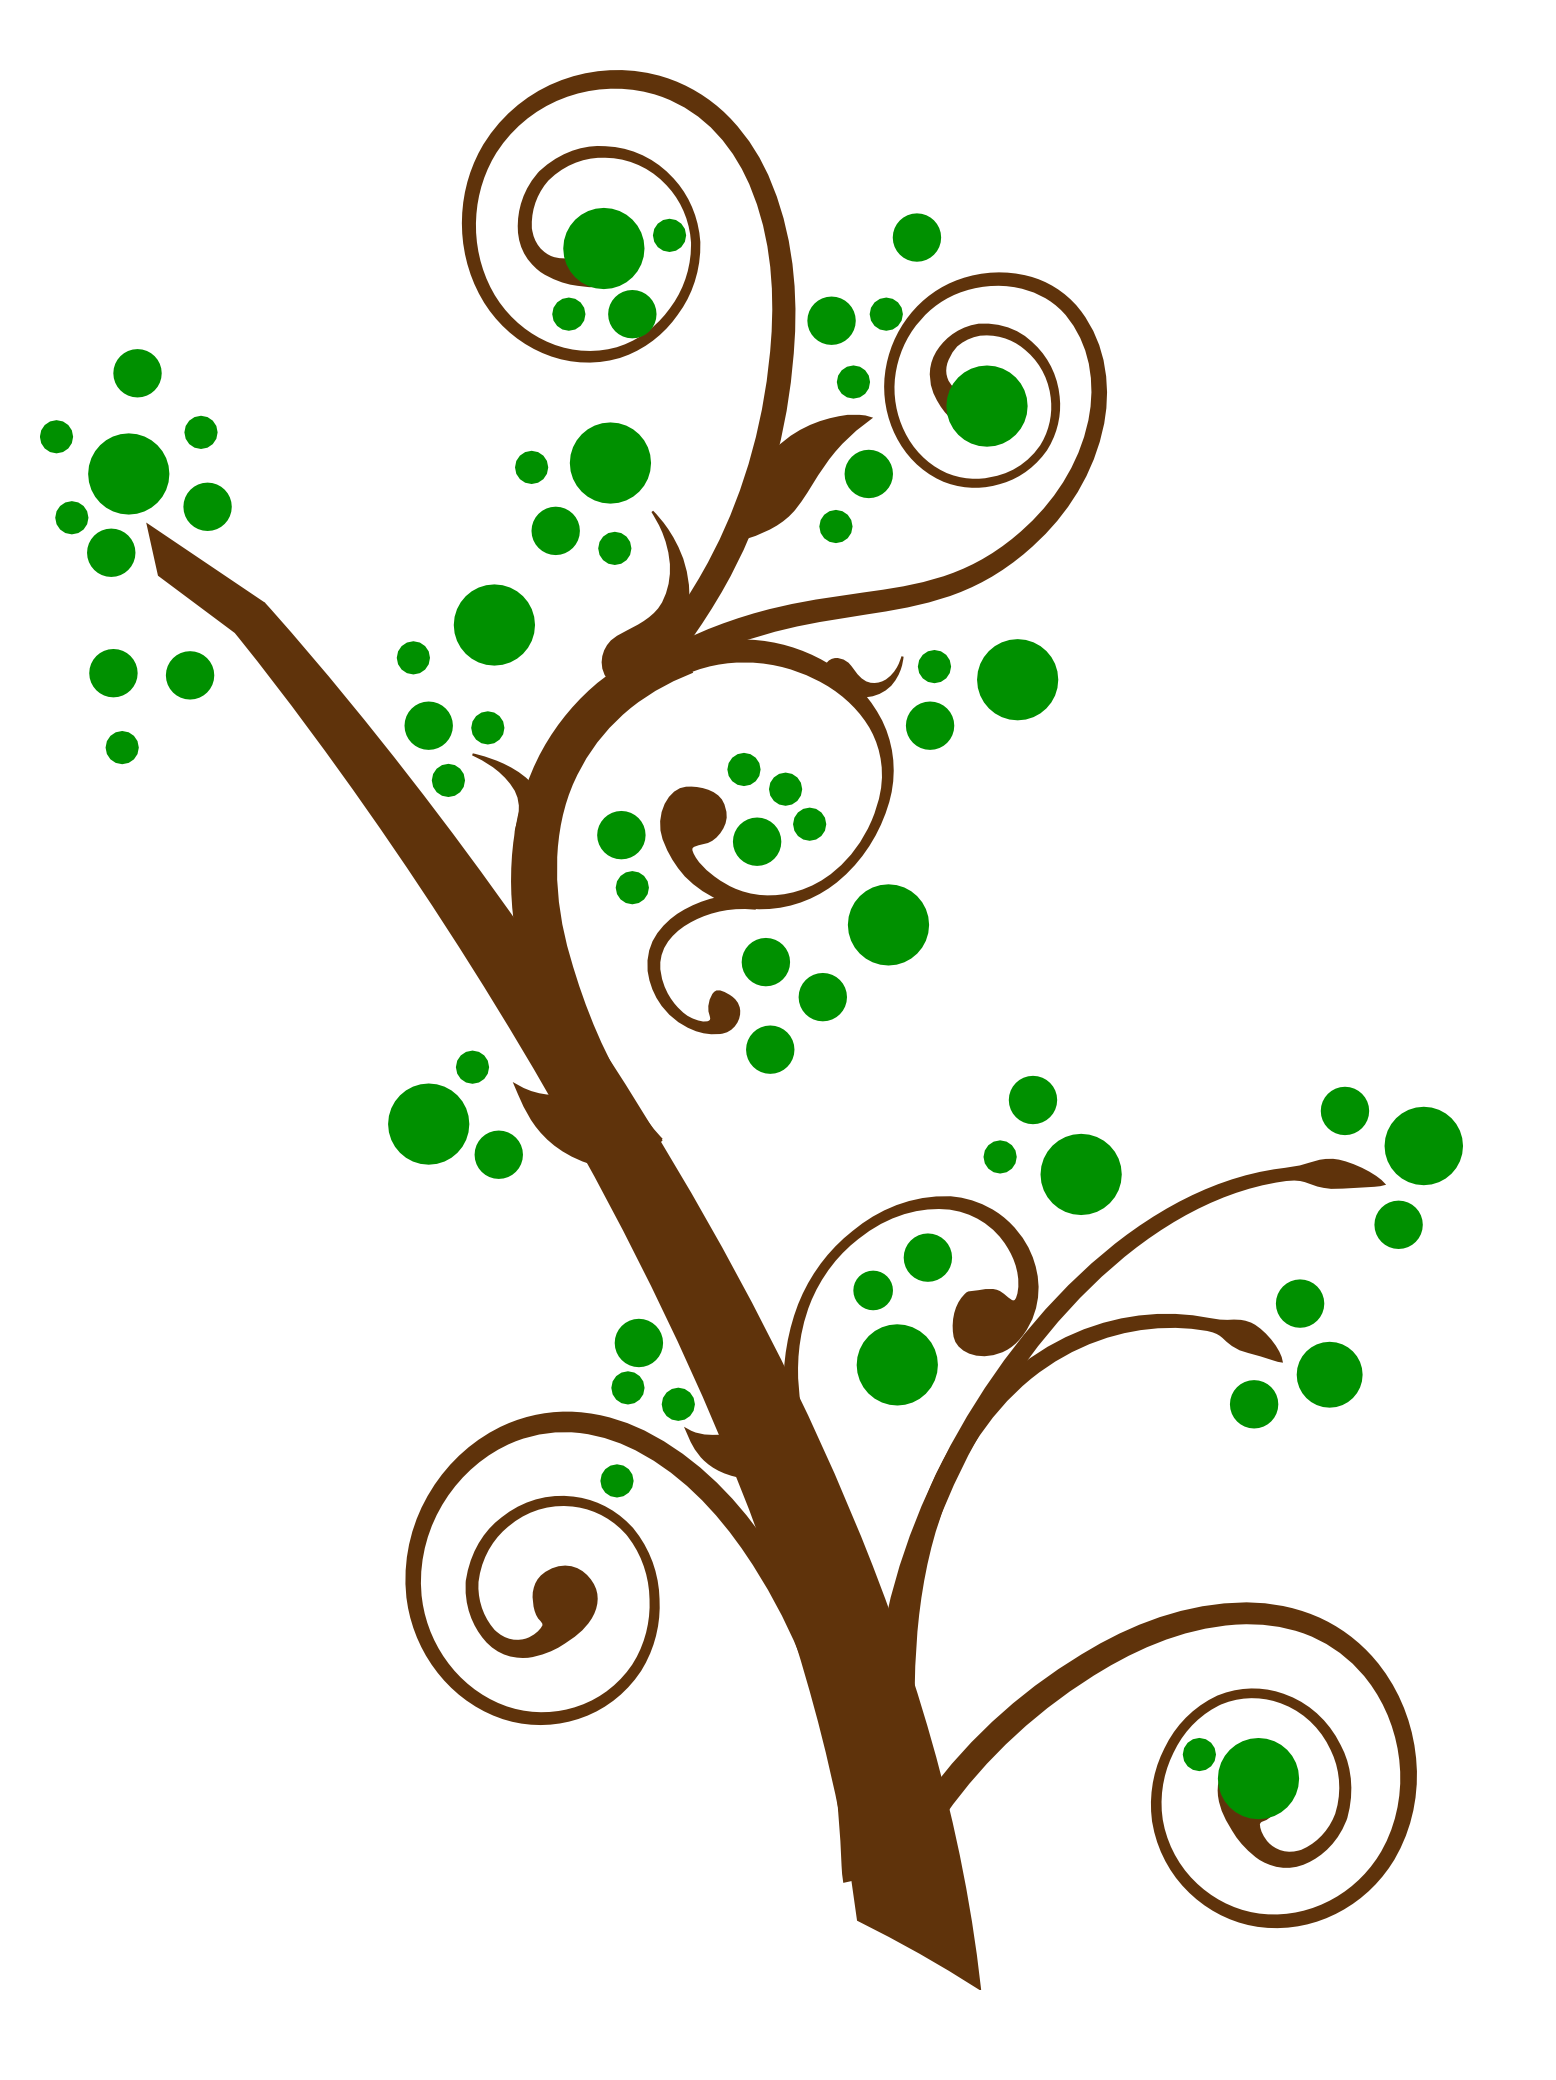 A Tree With Green And Brown Swirls And Dots